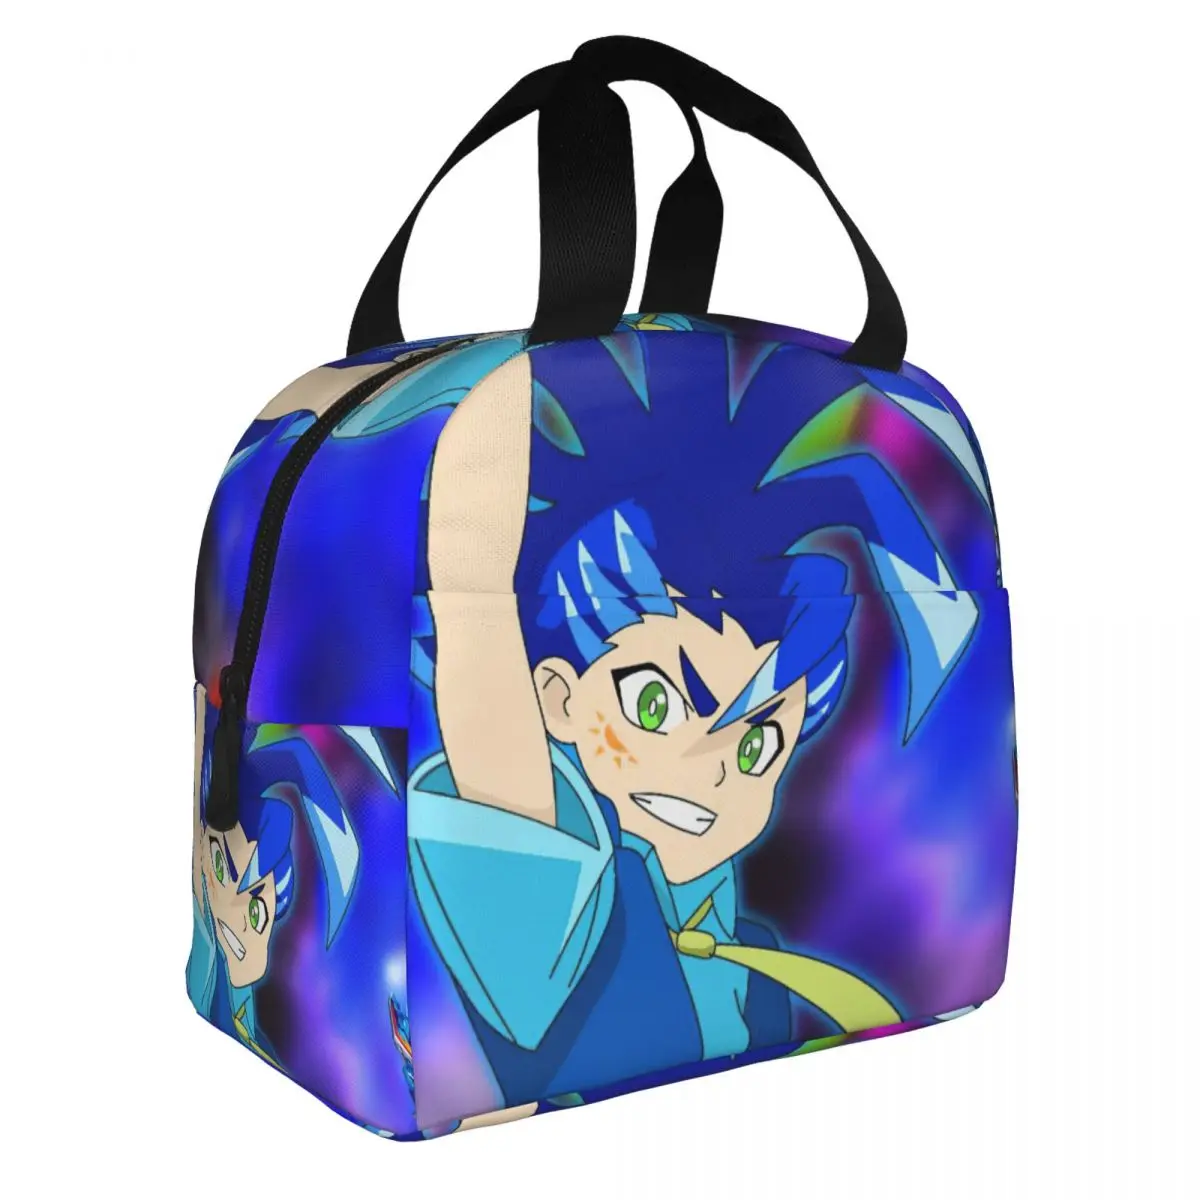 Beyblade Burst Lunch Bento Bags Portable Aluminum Foil thickened Thermal Cloth Lunch Bag for Women Men Boy